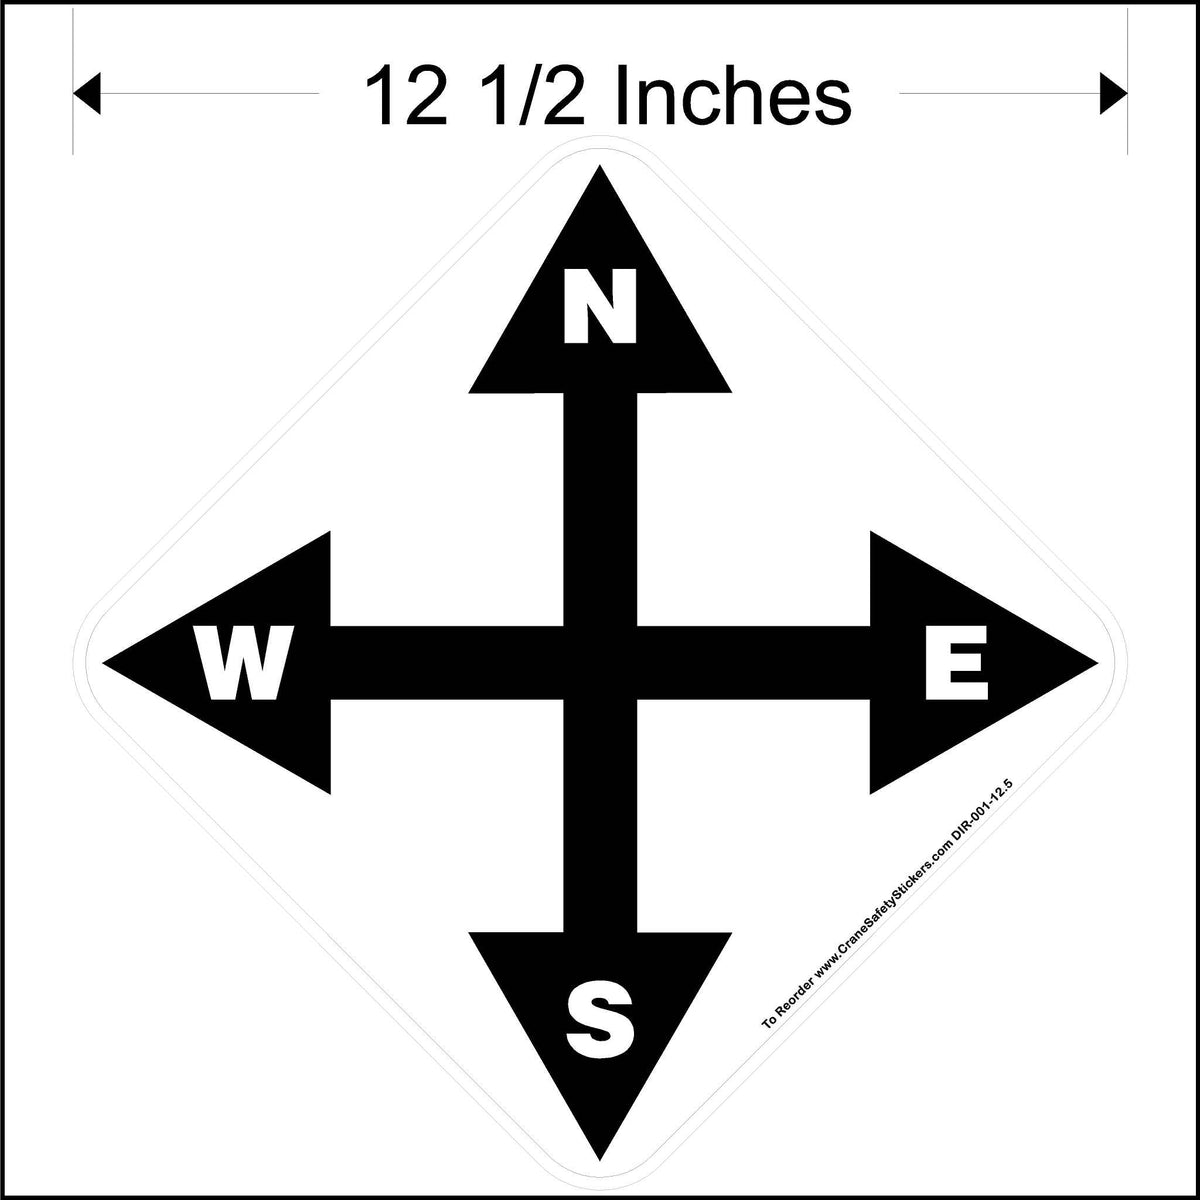 12 and a half Inch North South East West Overhead Crane Directional Decal.